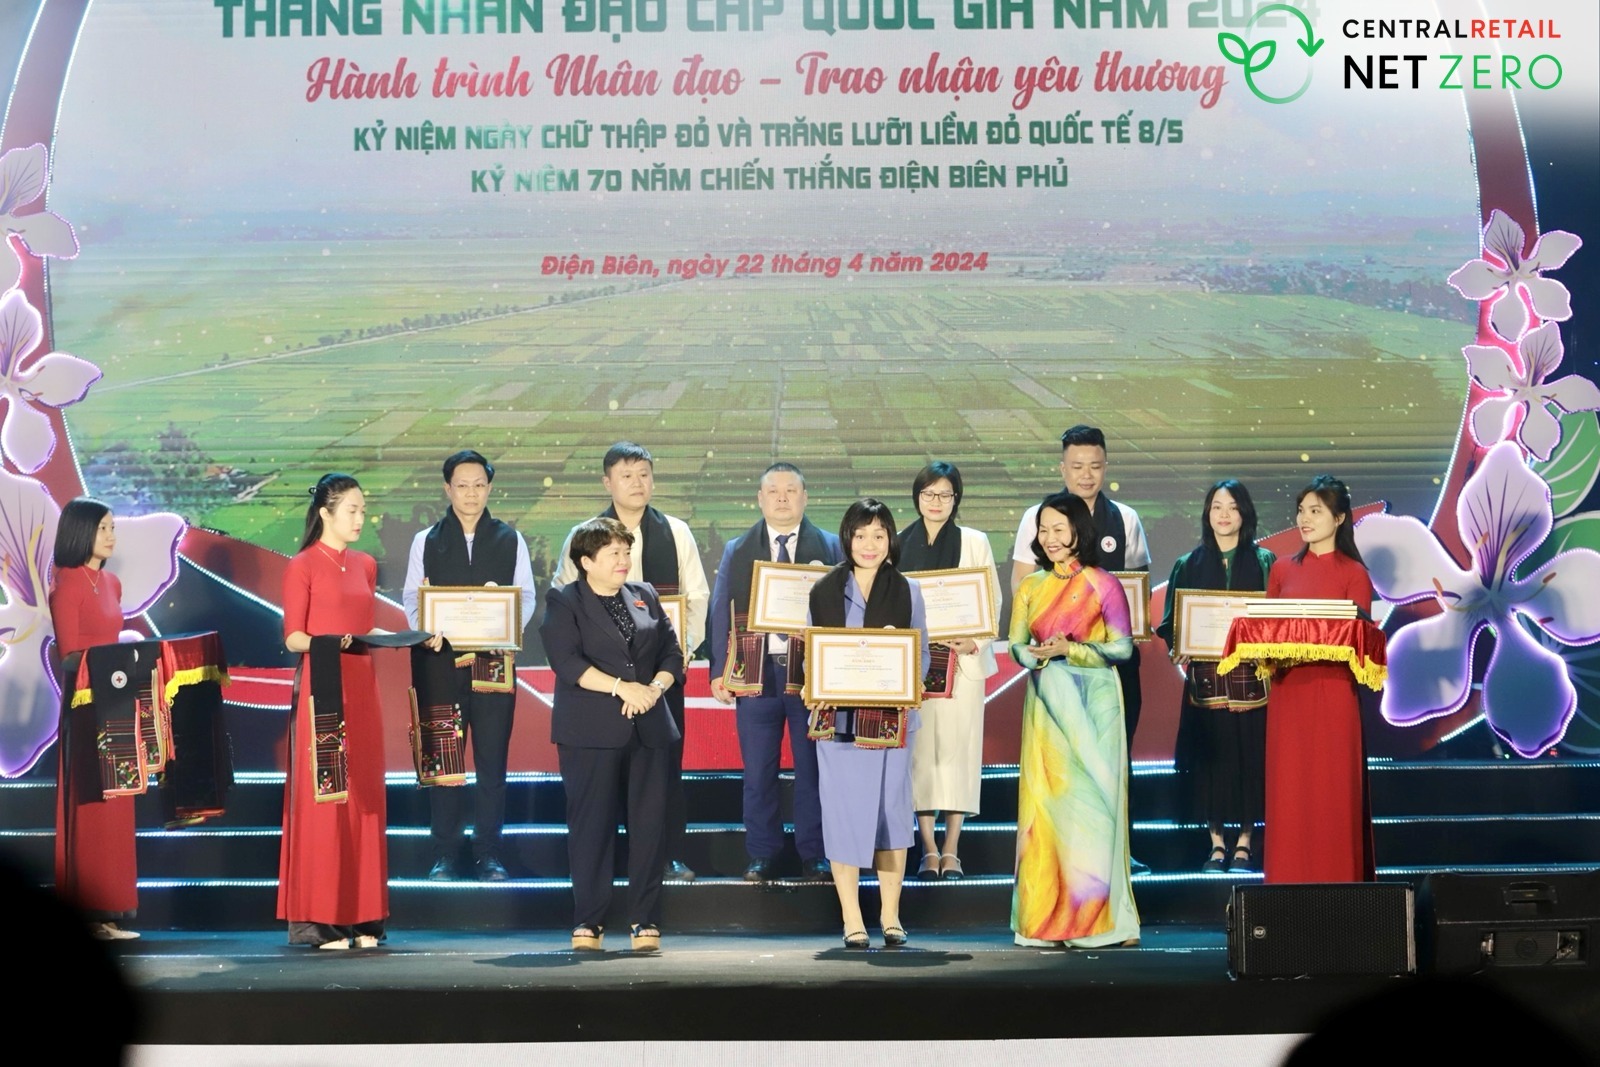 Central Retail Vietnam honored for Community Contributions at the National Red Cross Month Launch